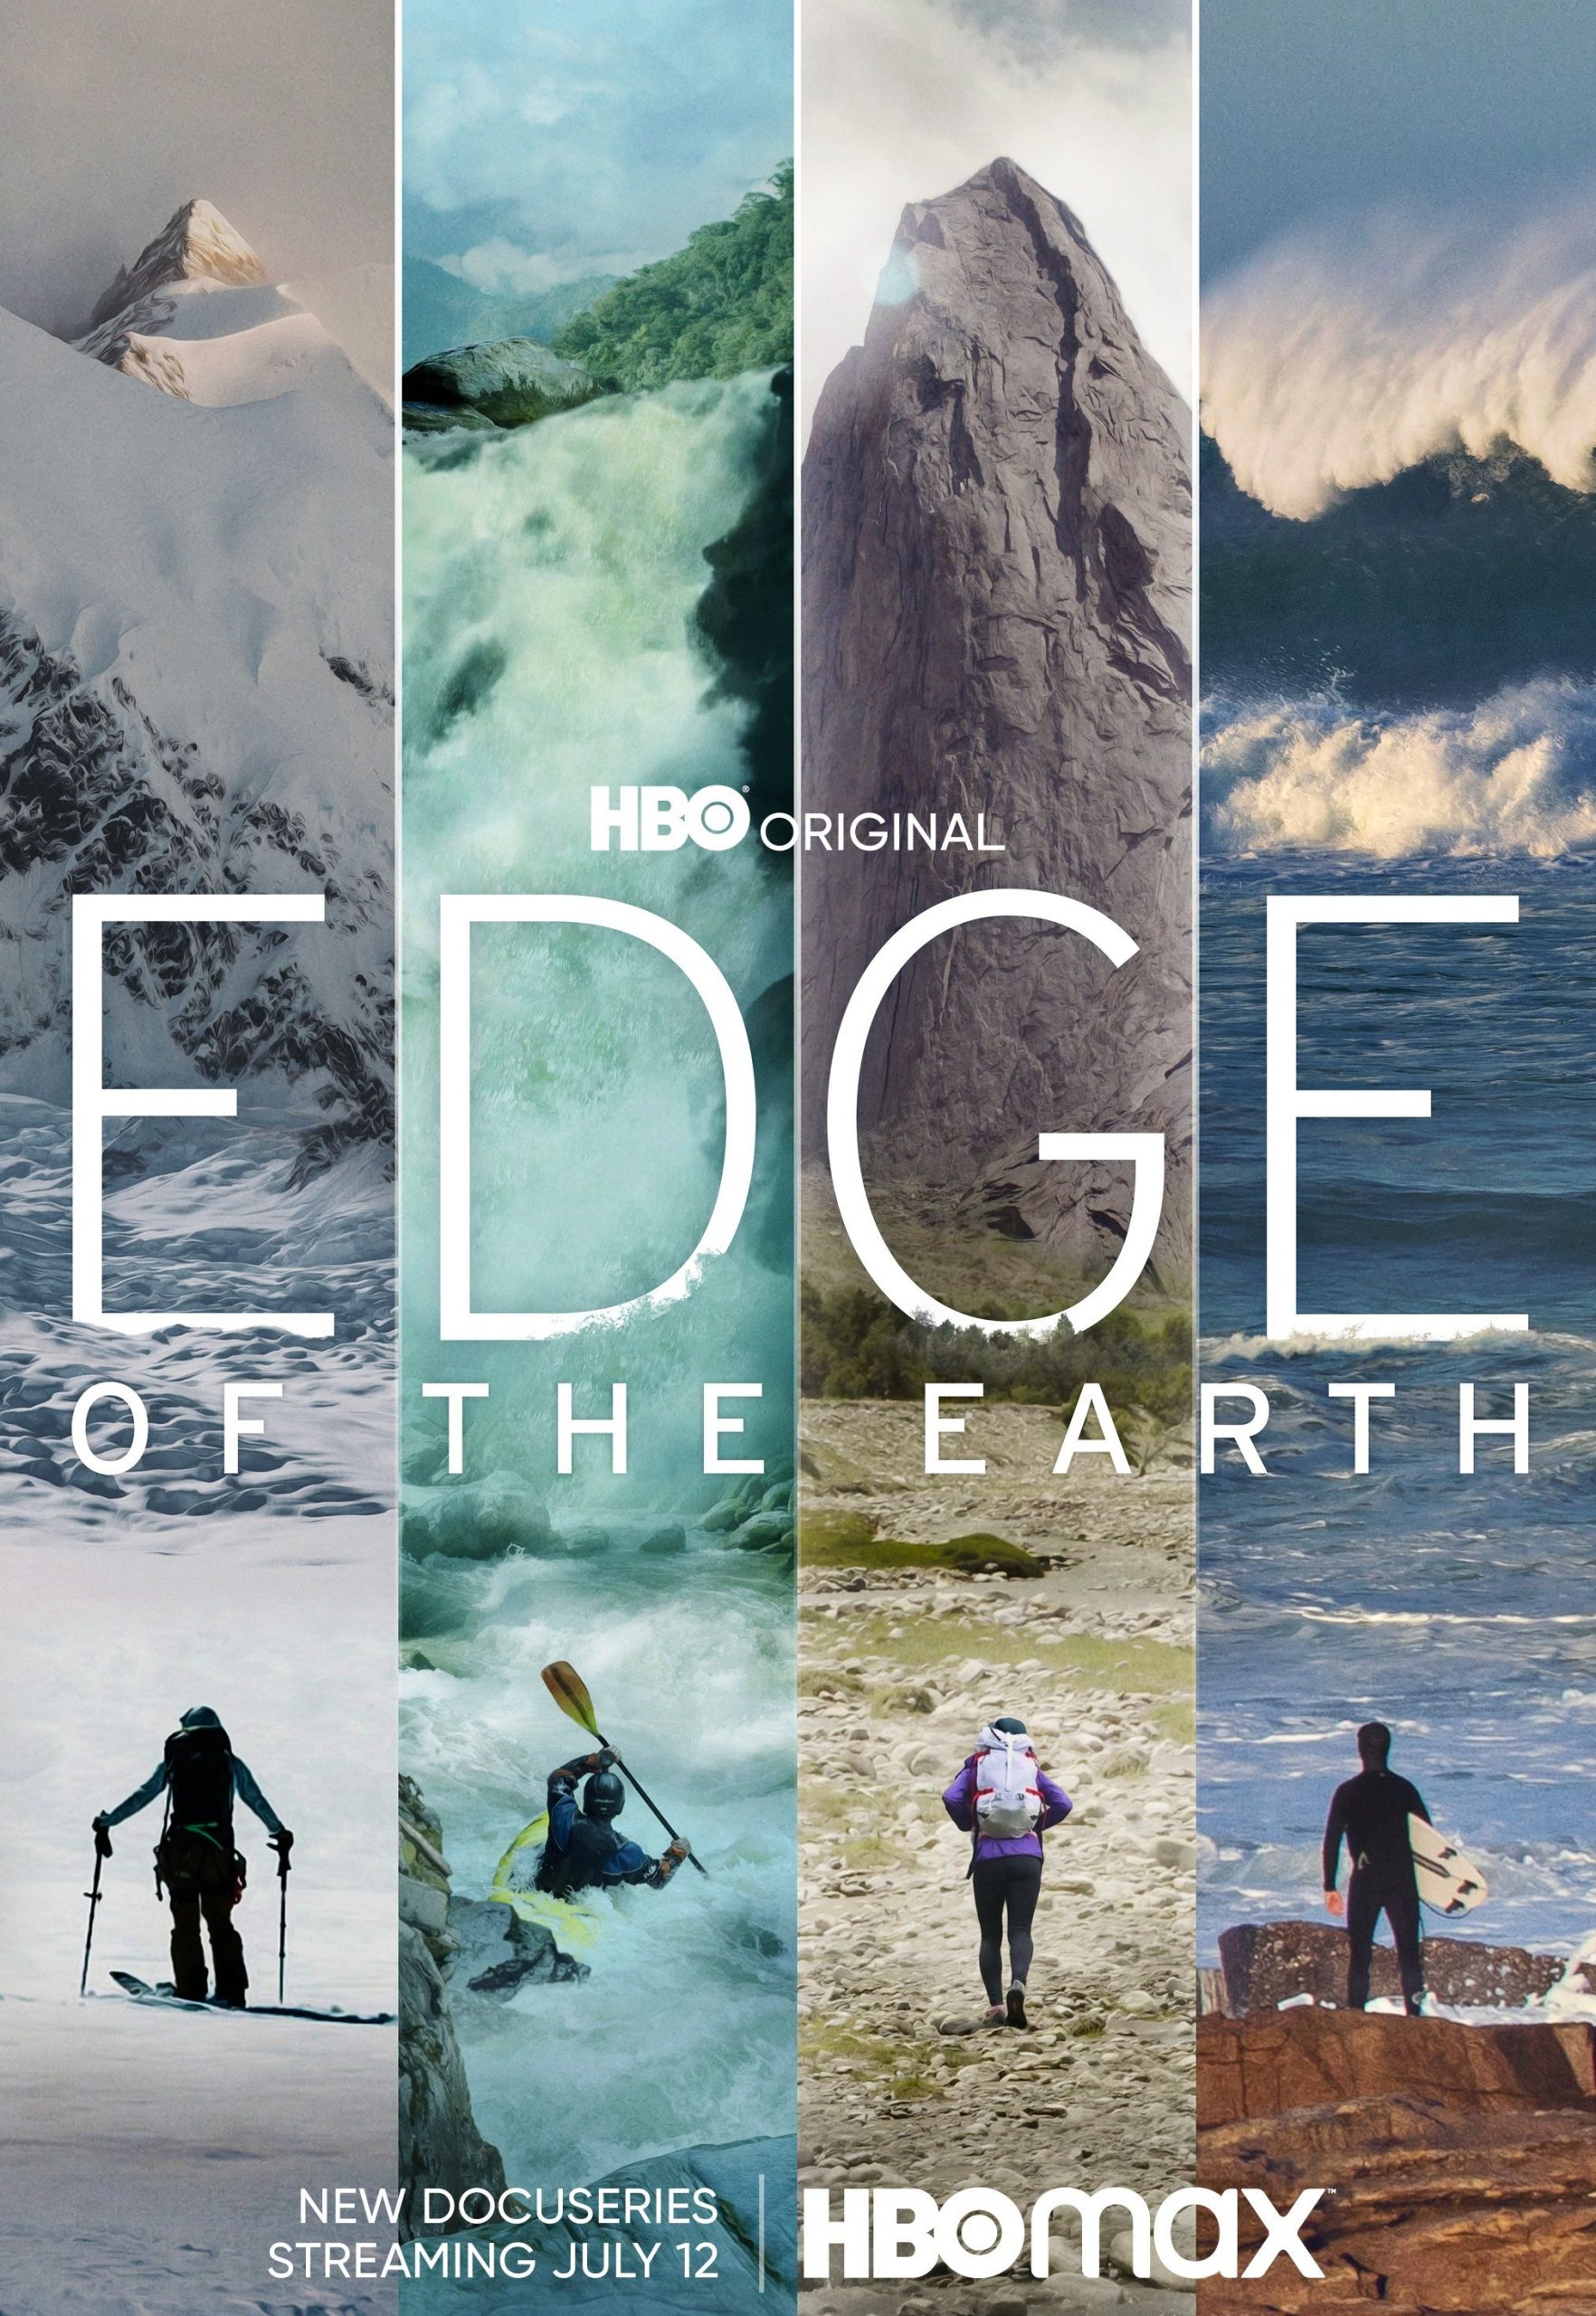 Is “Edge of the Earth” on HBO Max